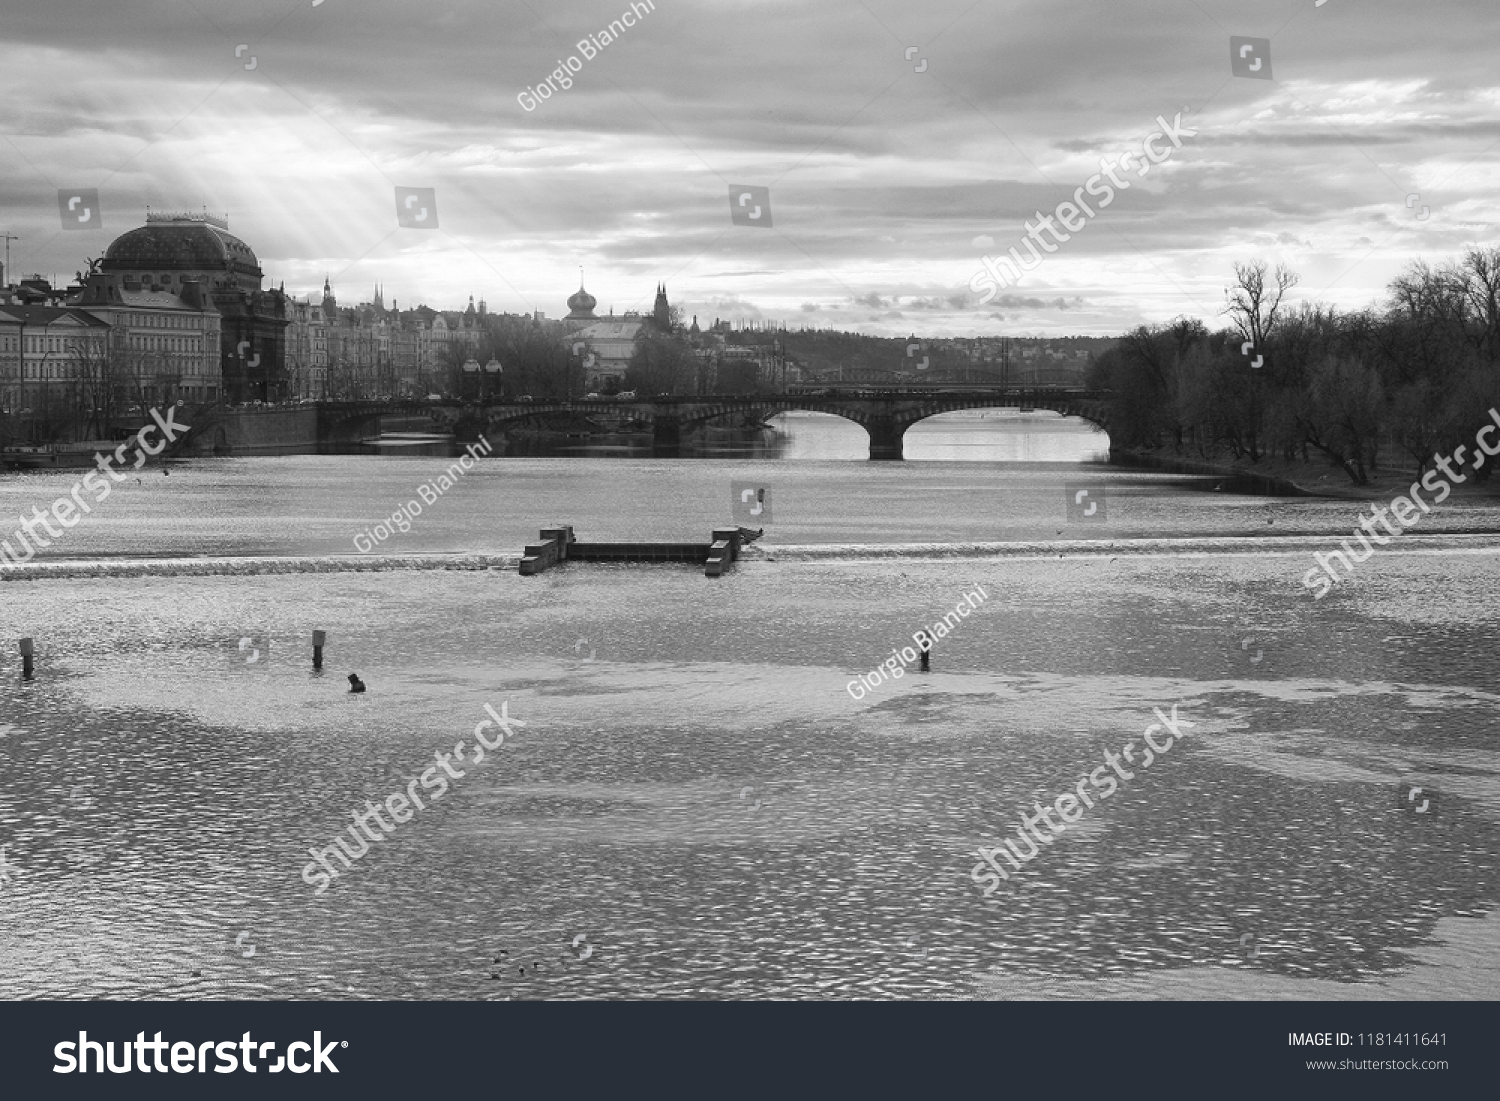 With Charles Bridge and New Town district of Prague in the background, a beautiful landscape of Vltava River in black and white with sun rays spreading through the clouds #1181411641